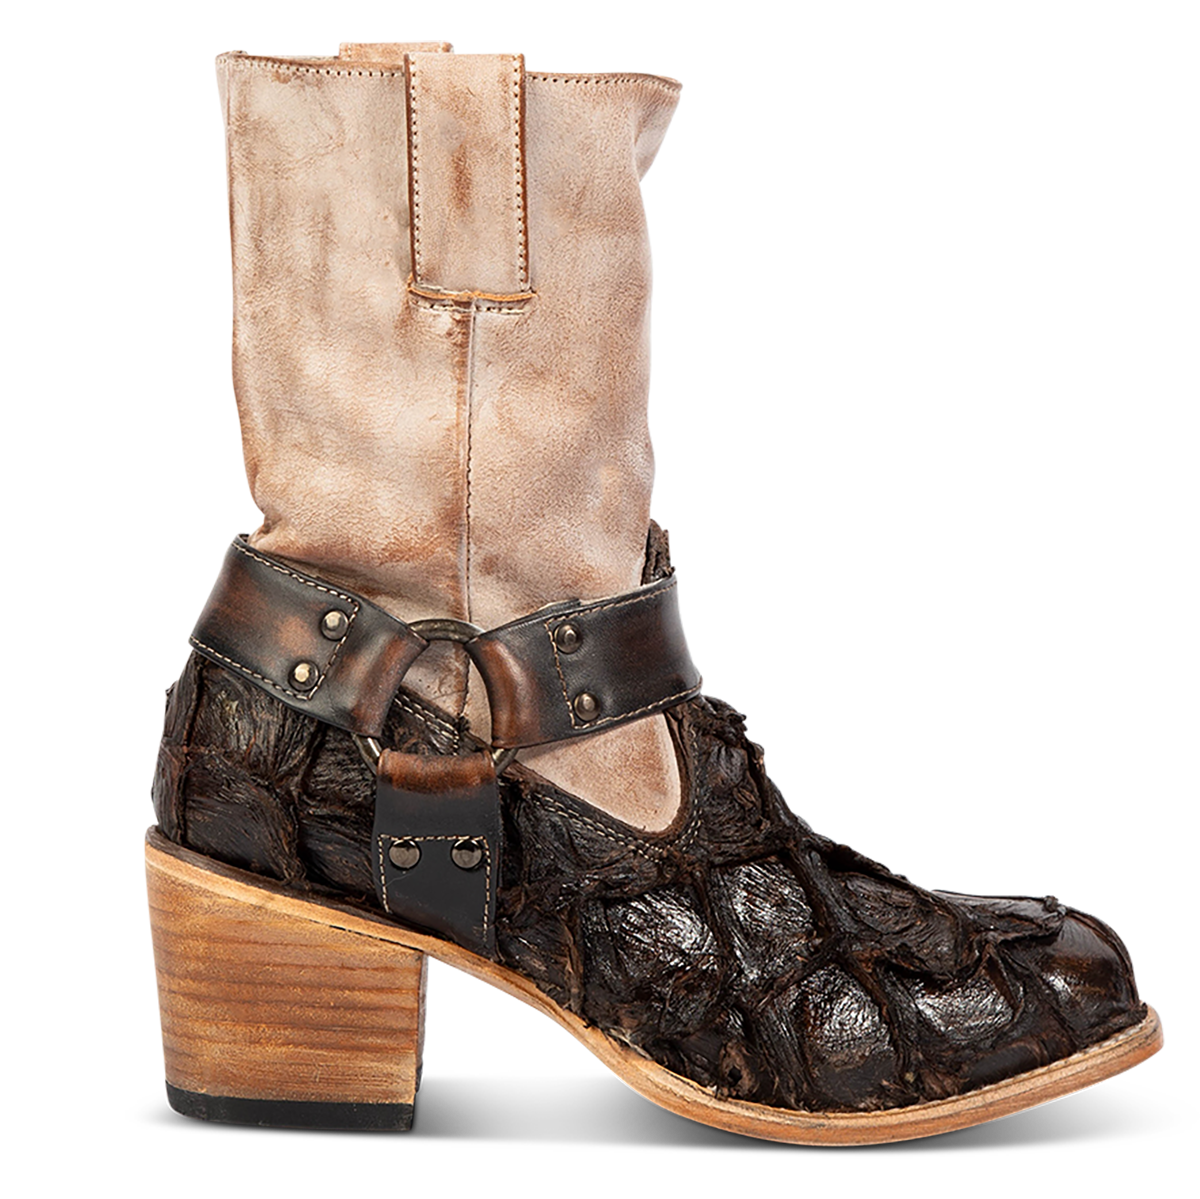 FREEBIRD women's Darcy taupe multi fish leather boot with a studded ankle harness, leather pull straps, an inside zip closure and a square toe